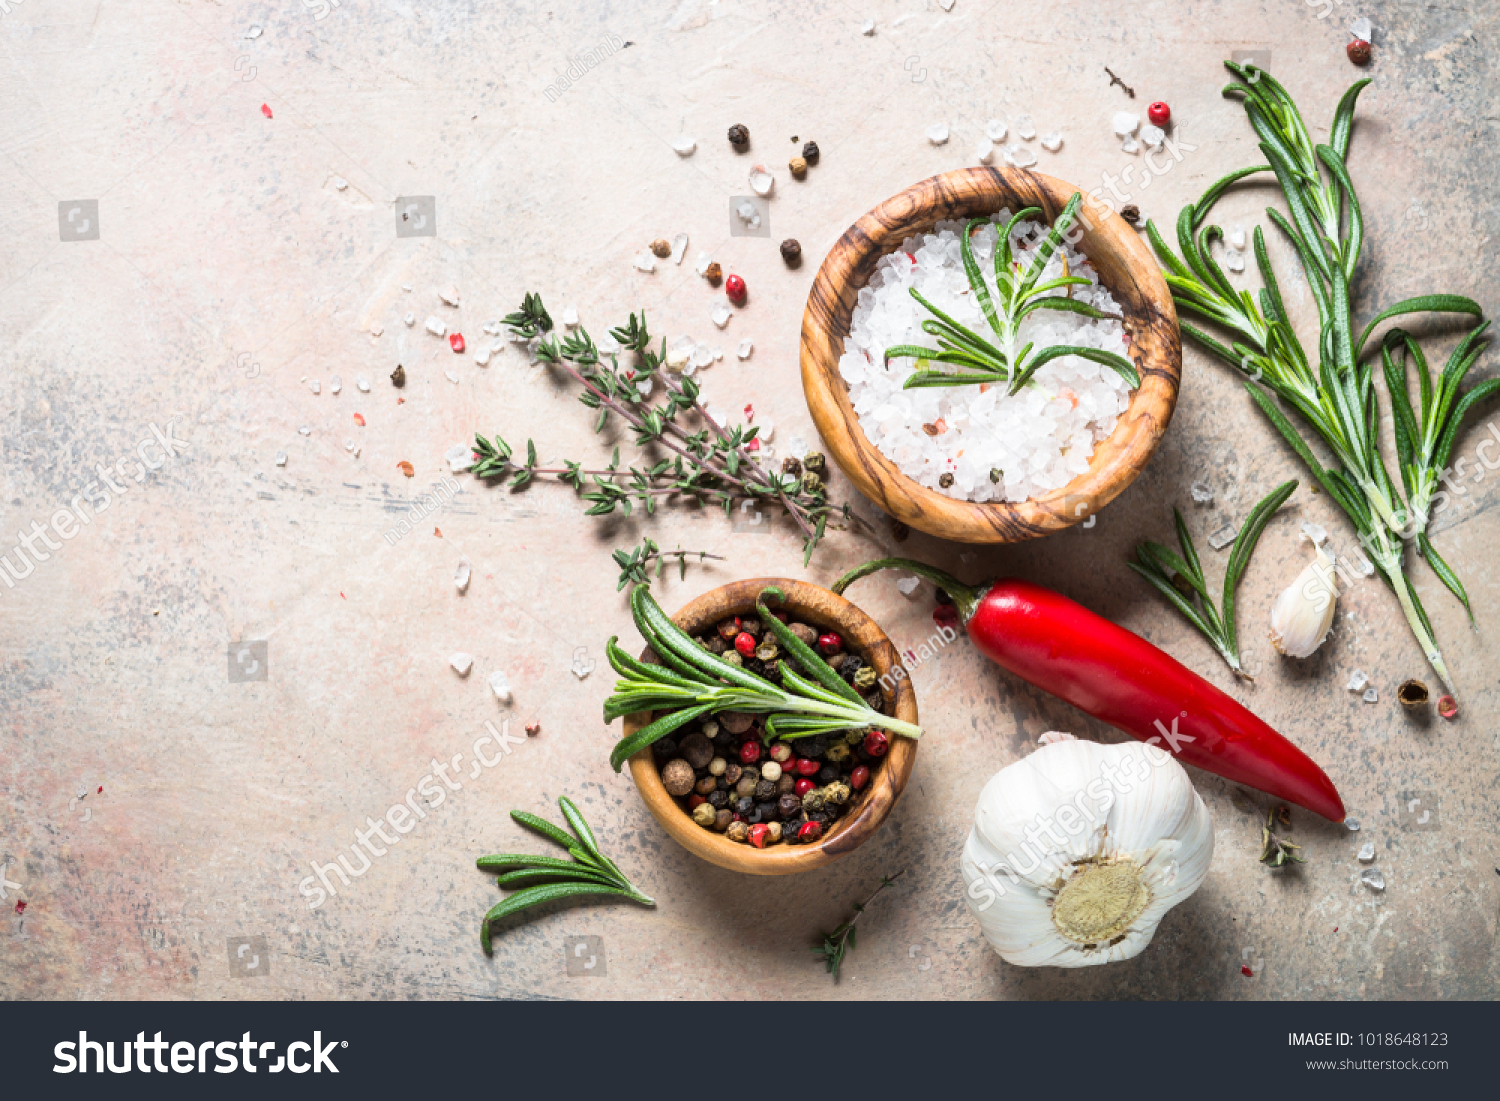 Food cooking background top view. #1018648123